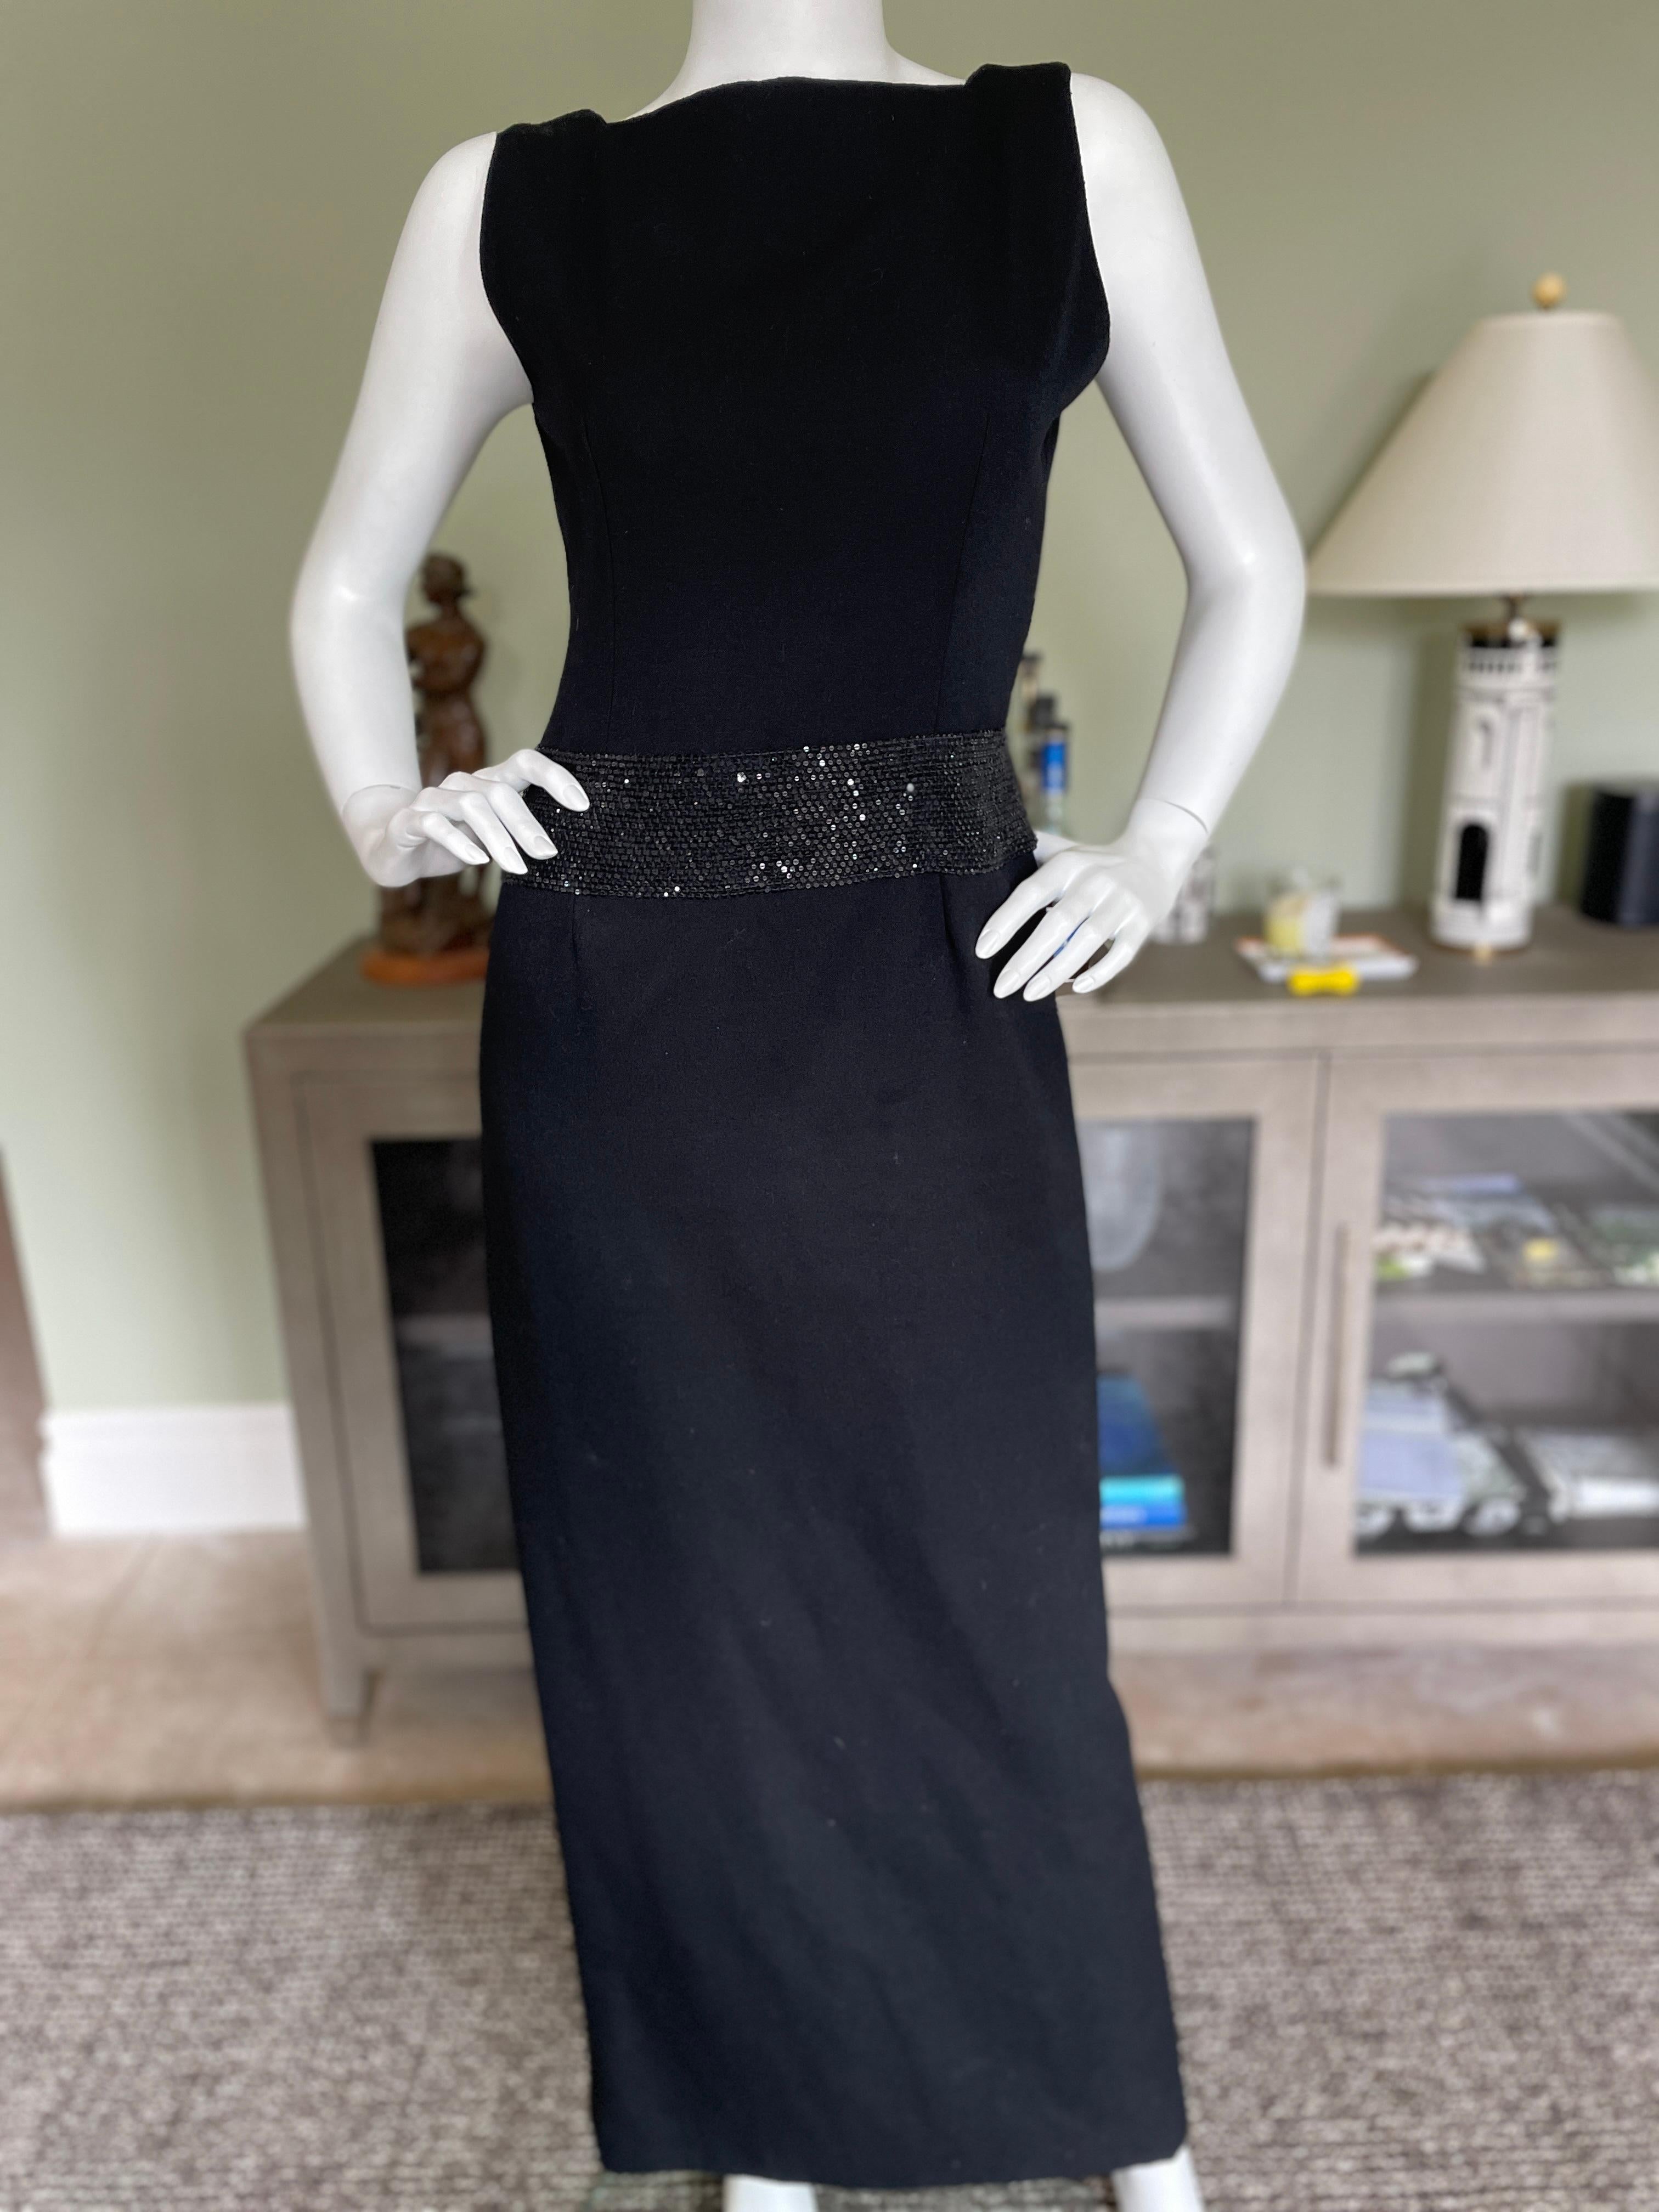 Carolyne Roehm 1980's Black Evening Dress with Plunging Back and Jeweled Waist
 So beautiful, much prettier in person.
This is exquisite.
Size 8
 Bust 38